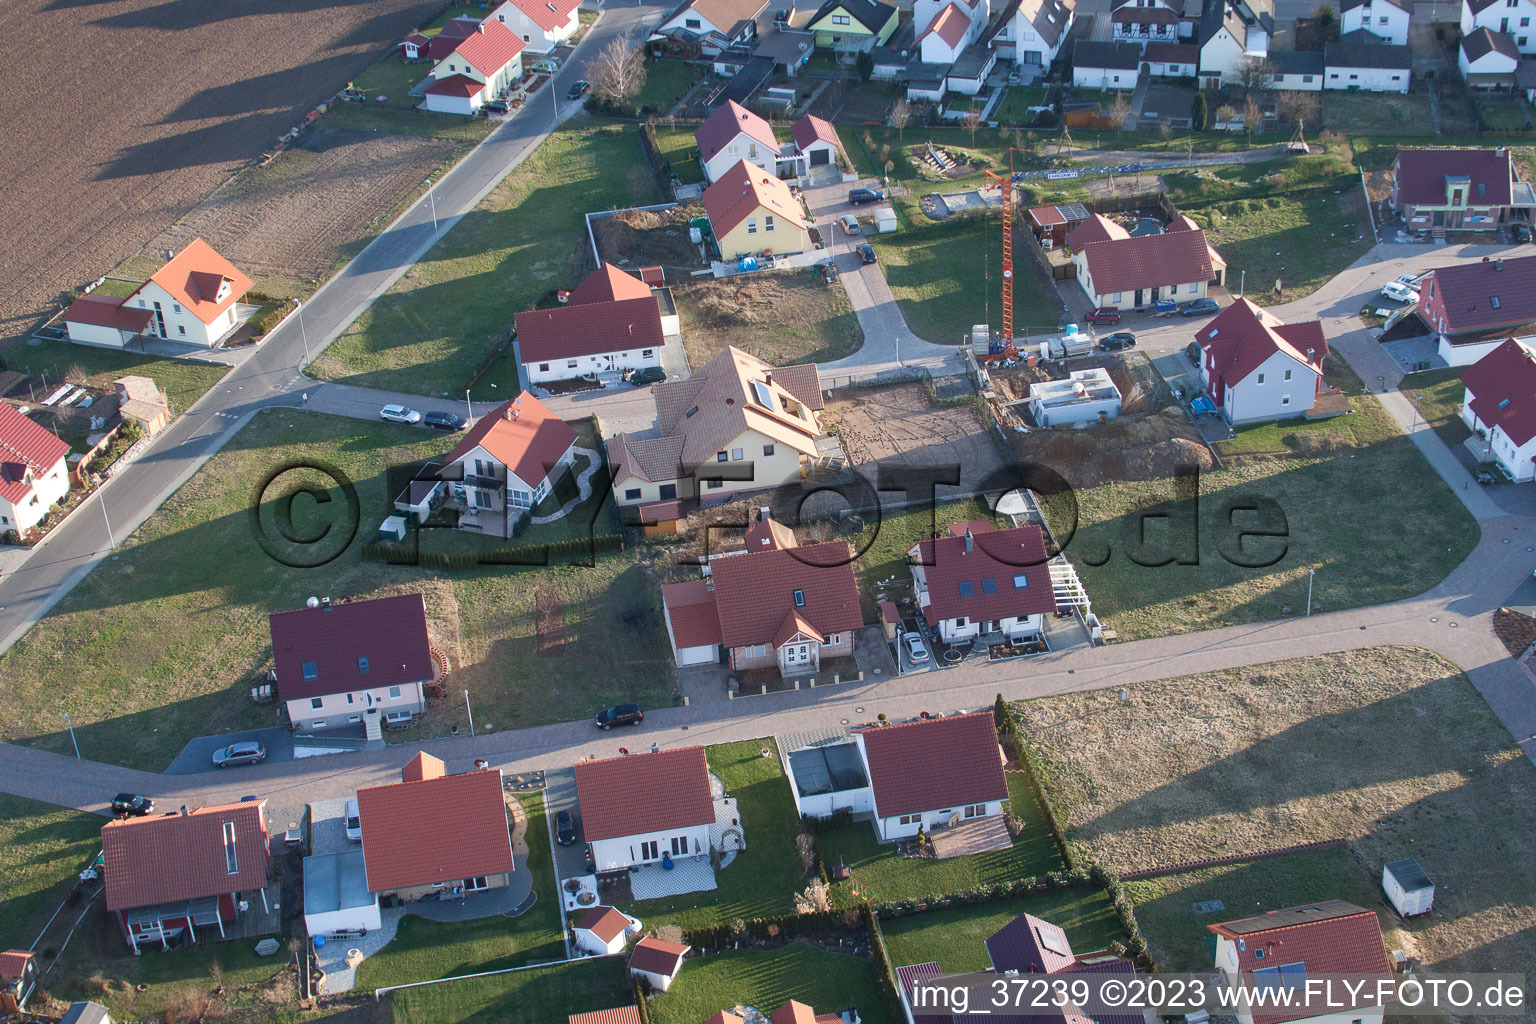 New development area NE in the district Schaidt in Wörth am Rhein in the state Rhineland-Palatinate, Germany seen from a drone